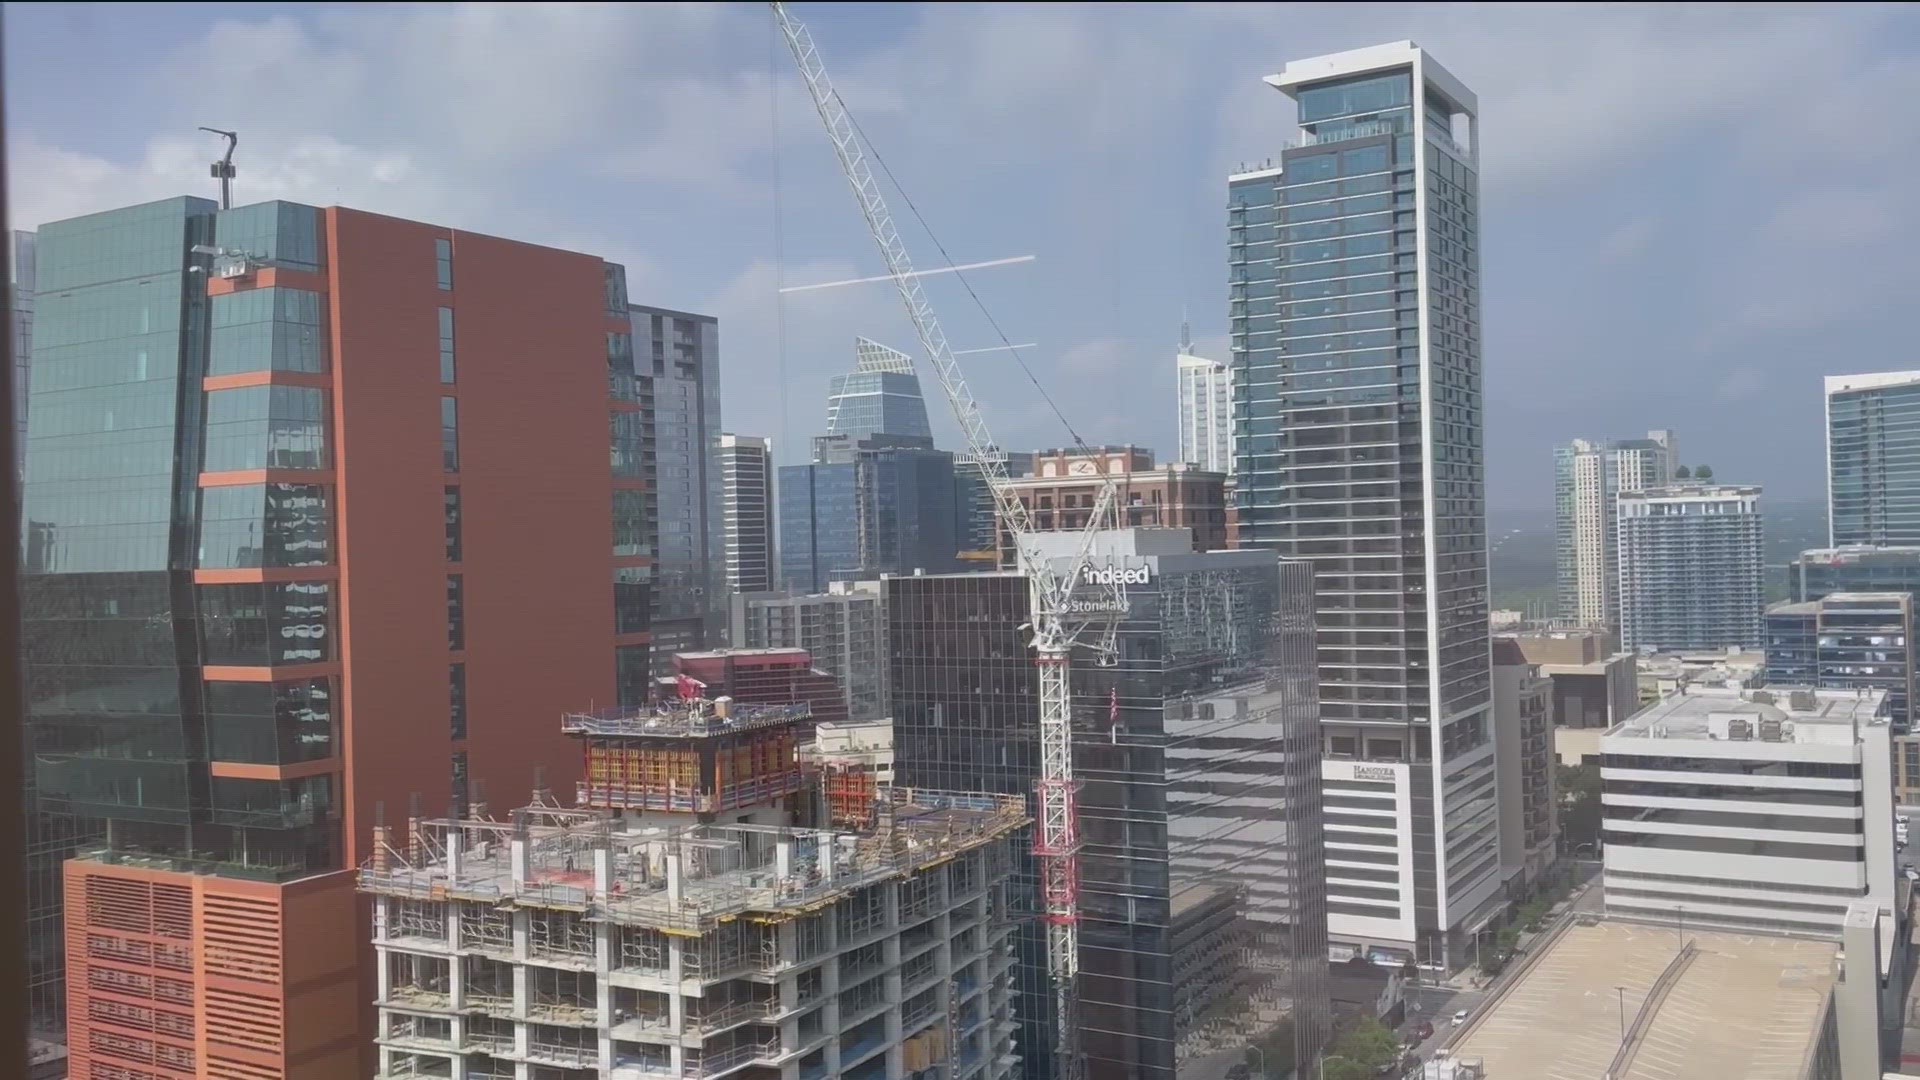 Construction cranes are popping up everywhere, especially in Downtown Austin and near the UT Austin campus.